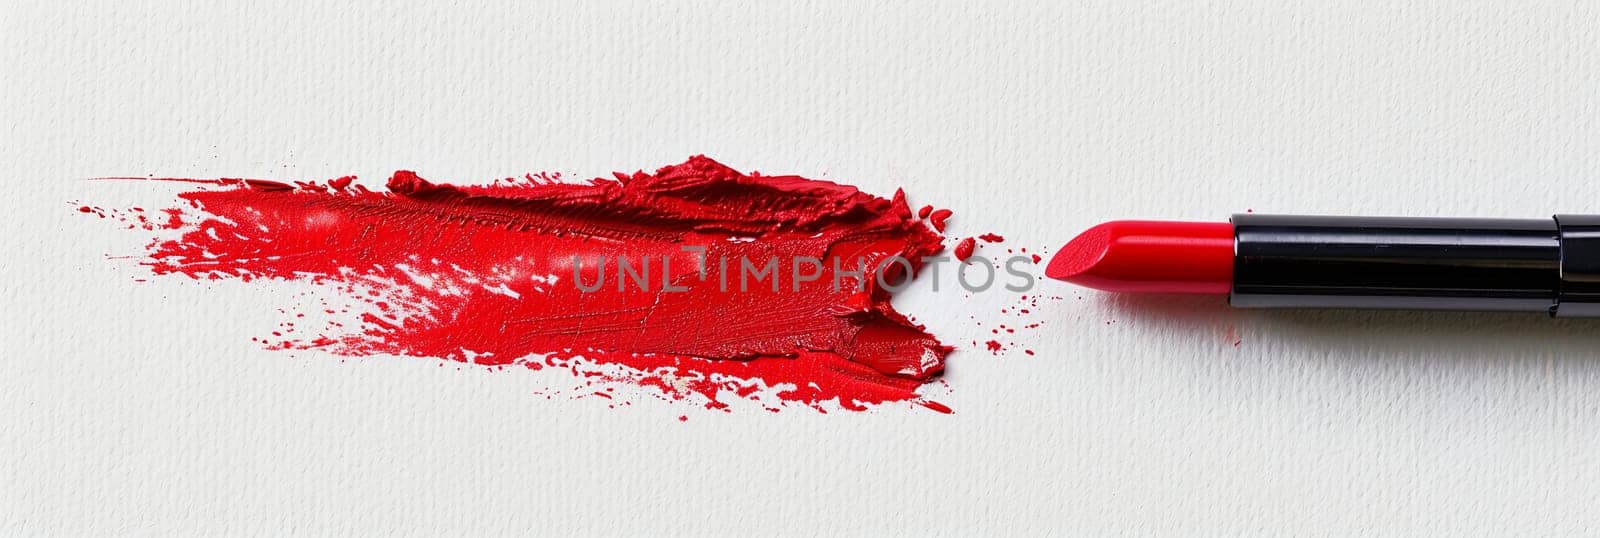 Close-up of red lipstick drawing a swatch line on a white surface, leaving a smear of classic red matte lipstick.